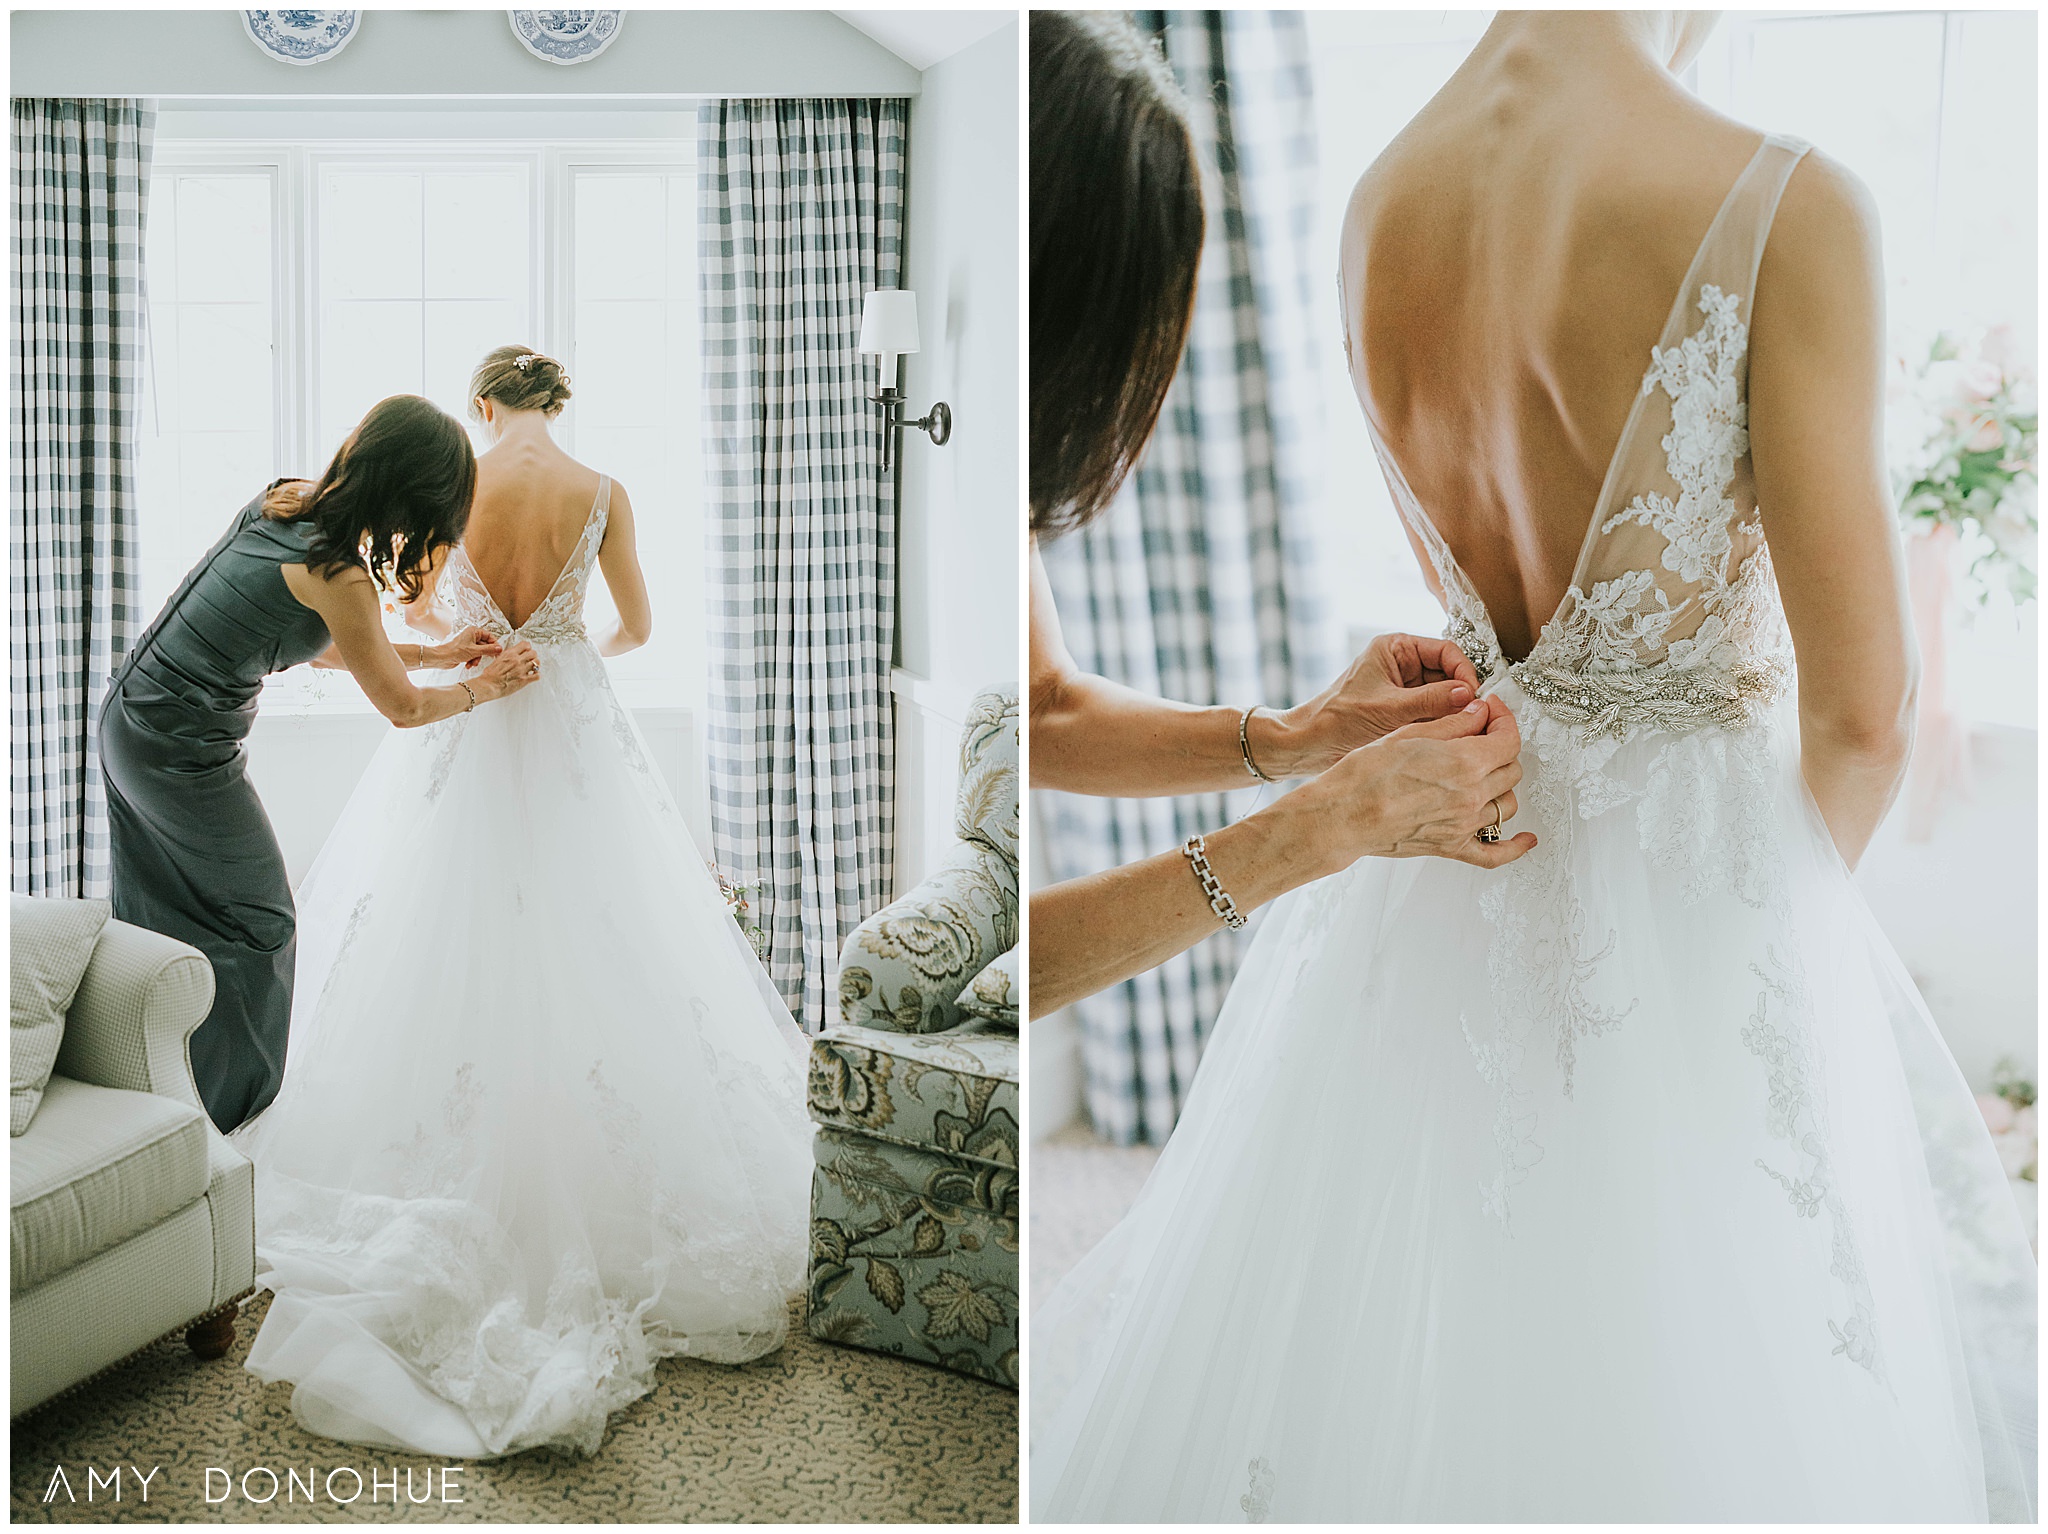 Getting into the dress | Woodstock Wedding Photographer | © Amy Donohue Photography